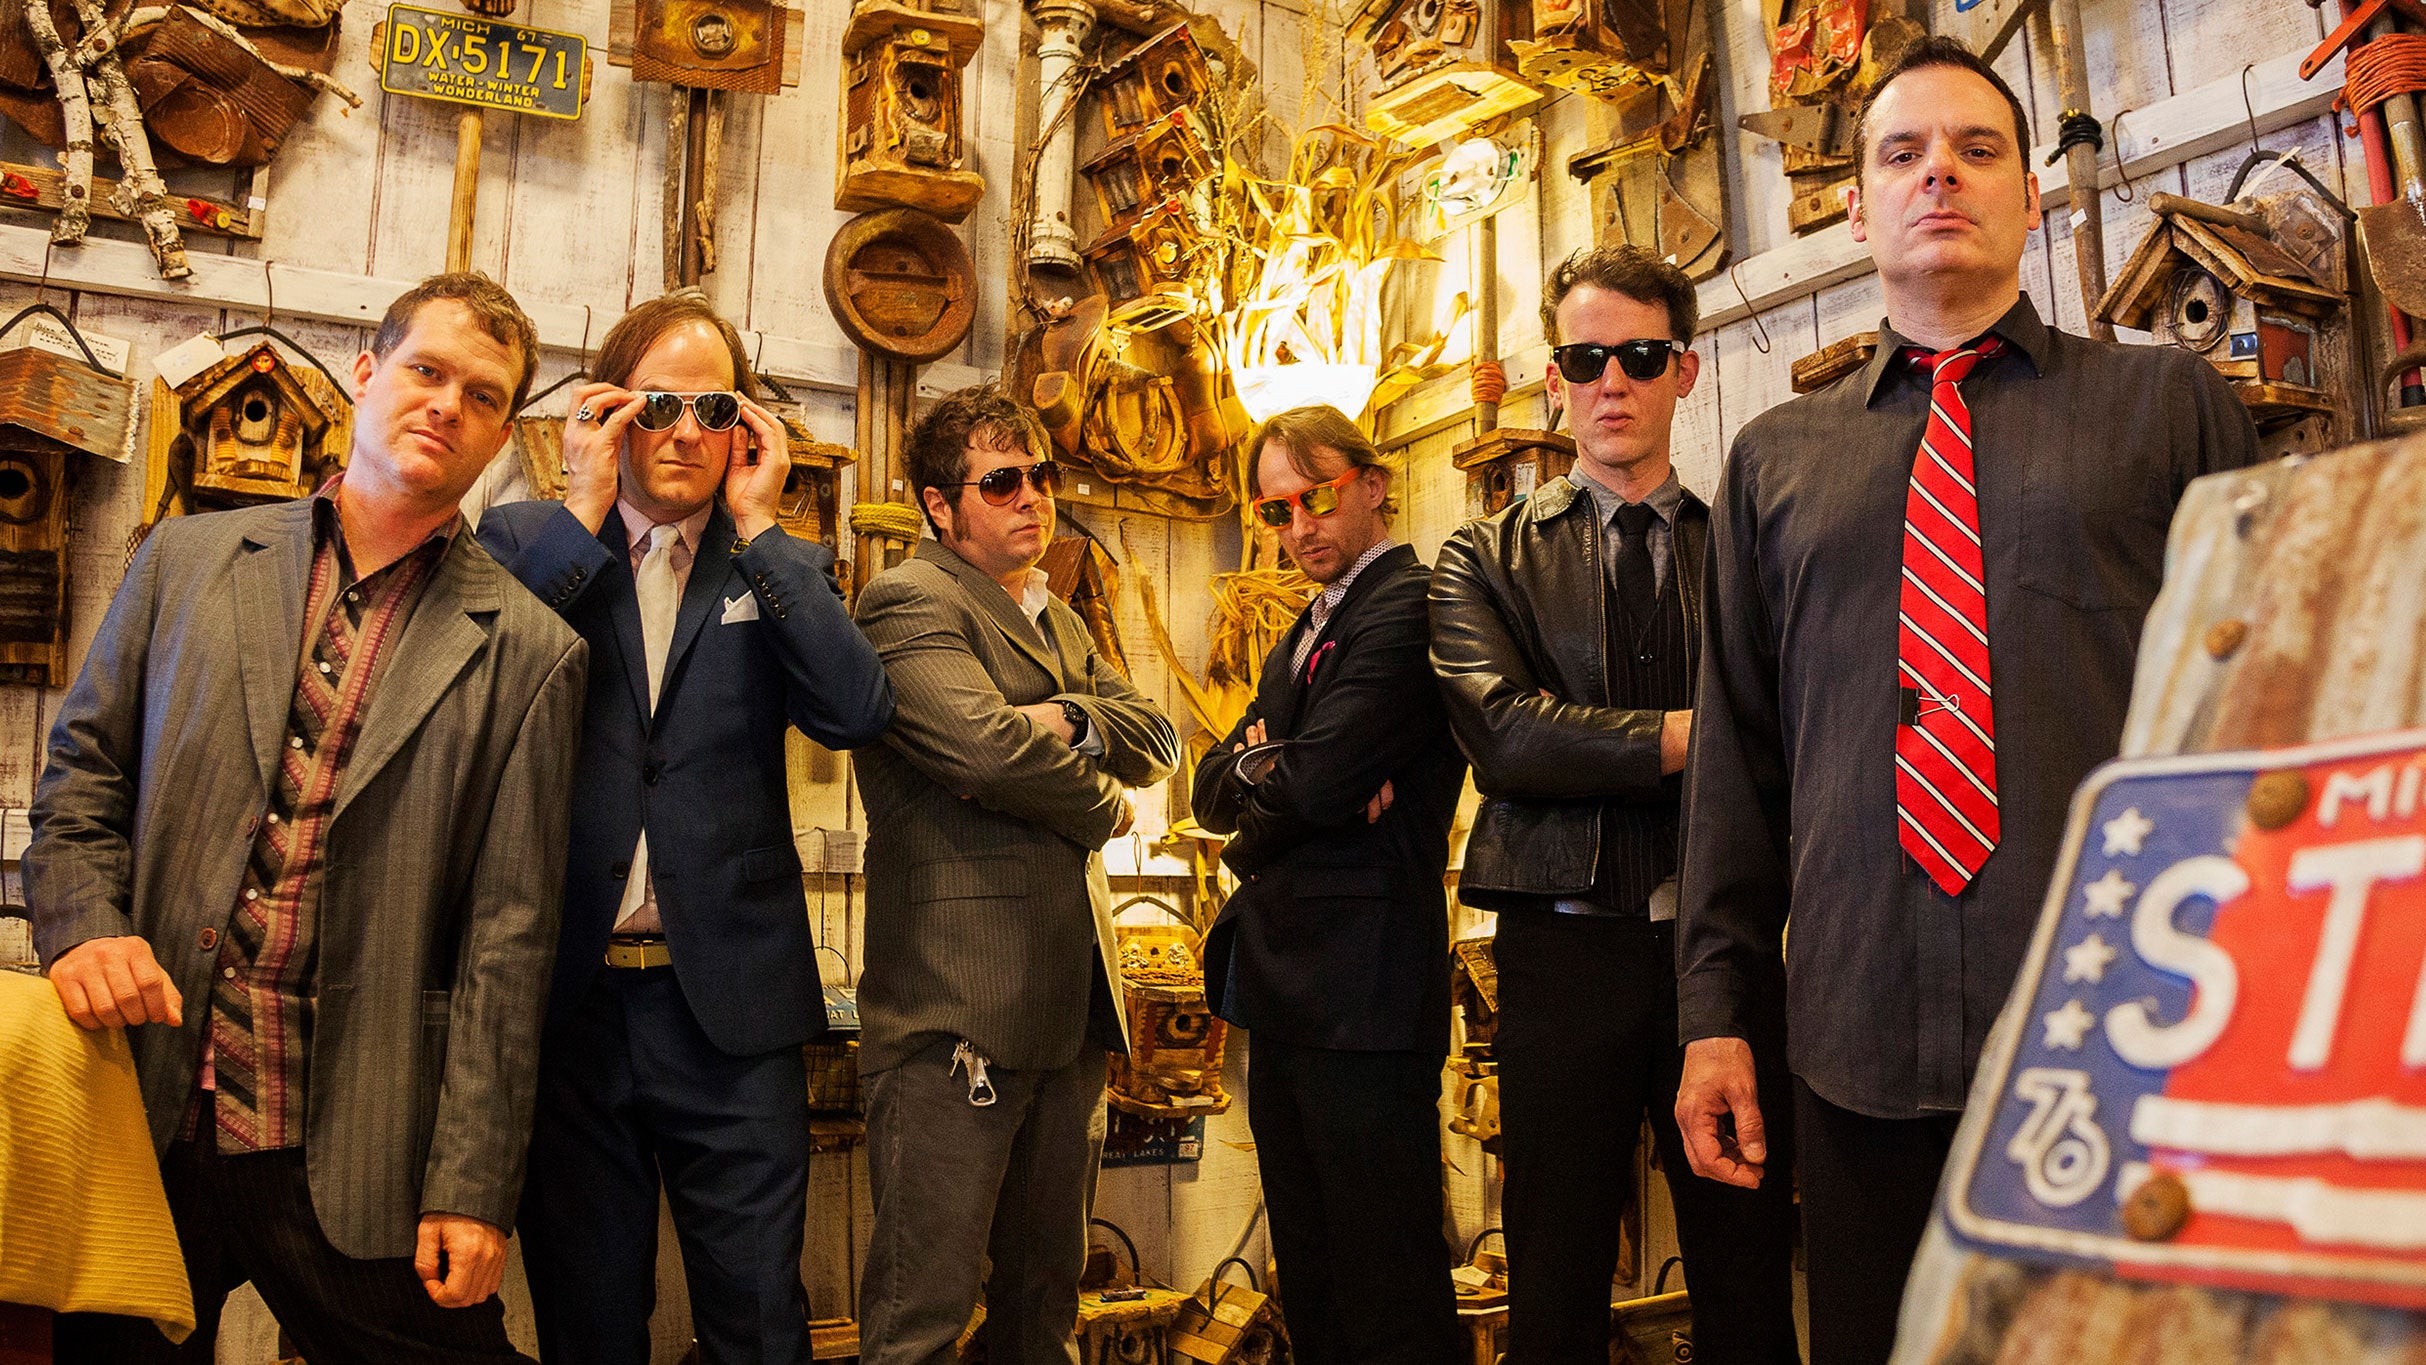 Electric Six w/ Supersuckers at Bell's Eccentric Cafe